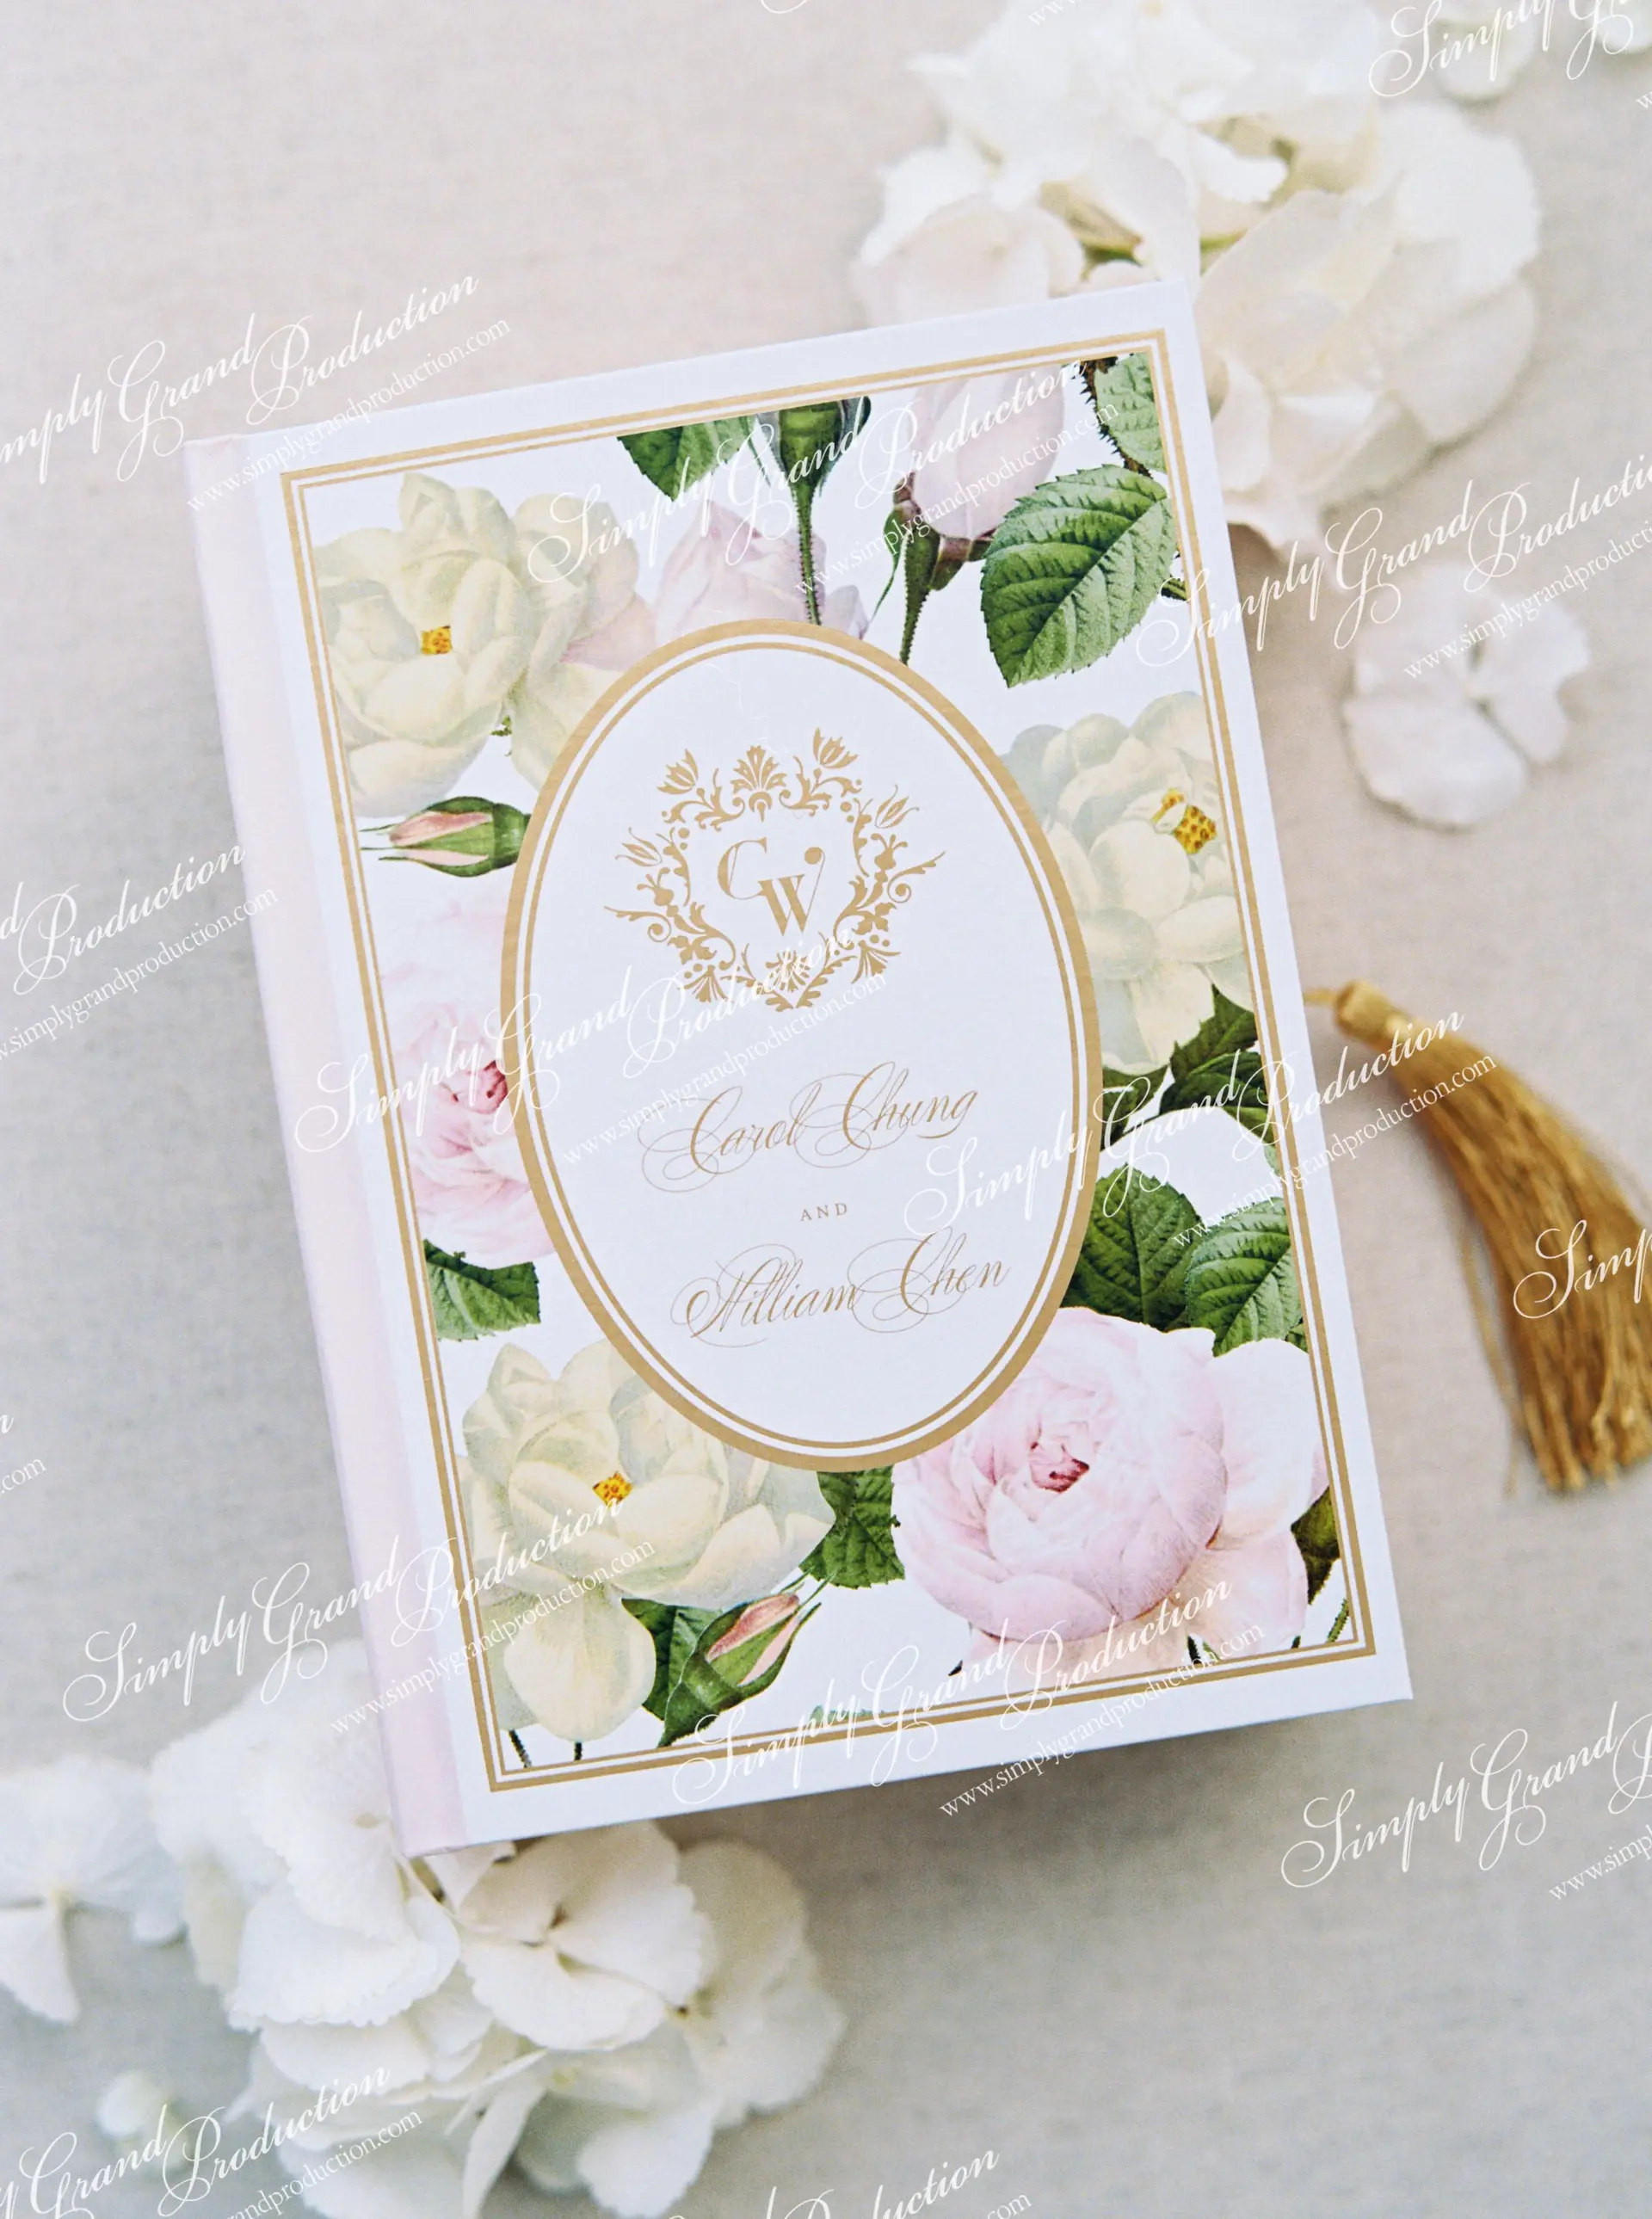 Simply_Grand_Production_Outdoor_wedding_decoration_garden_stationery_Country_Club_1_9.jpg